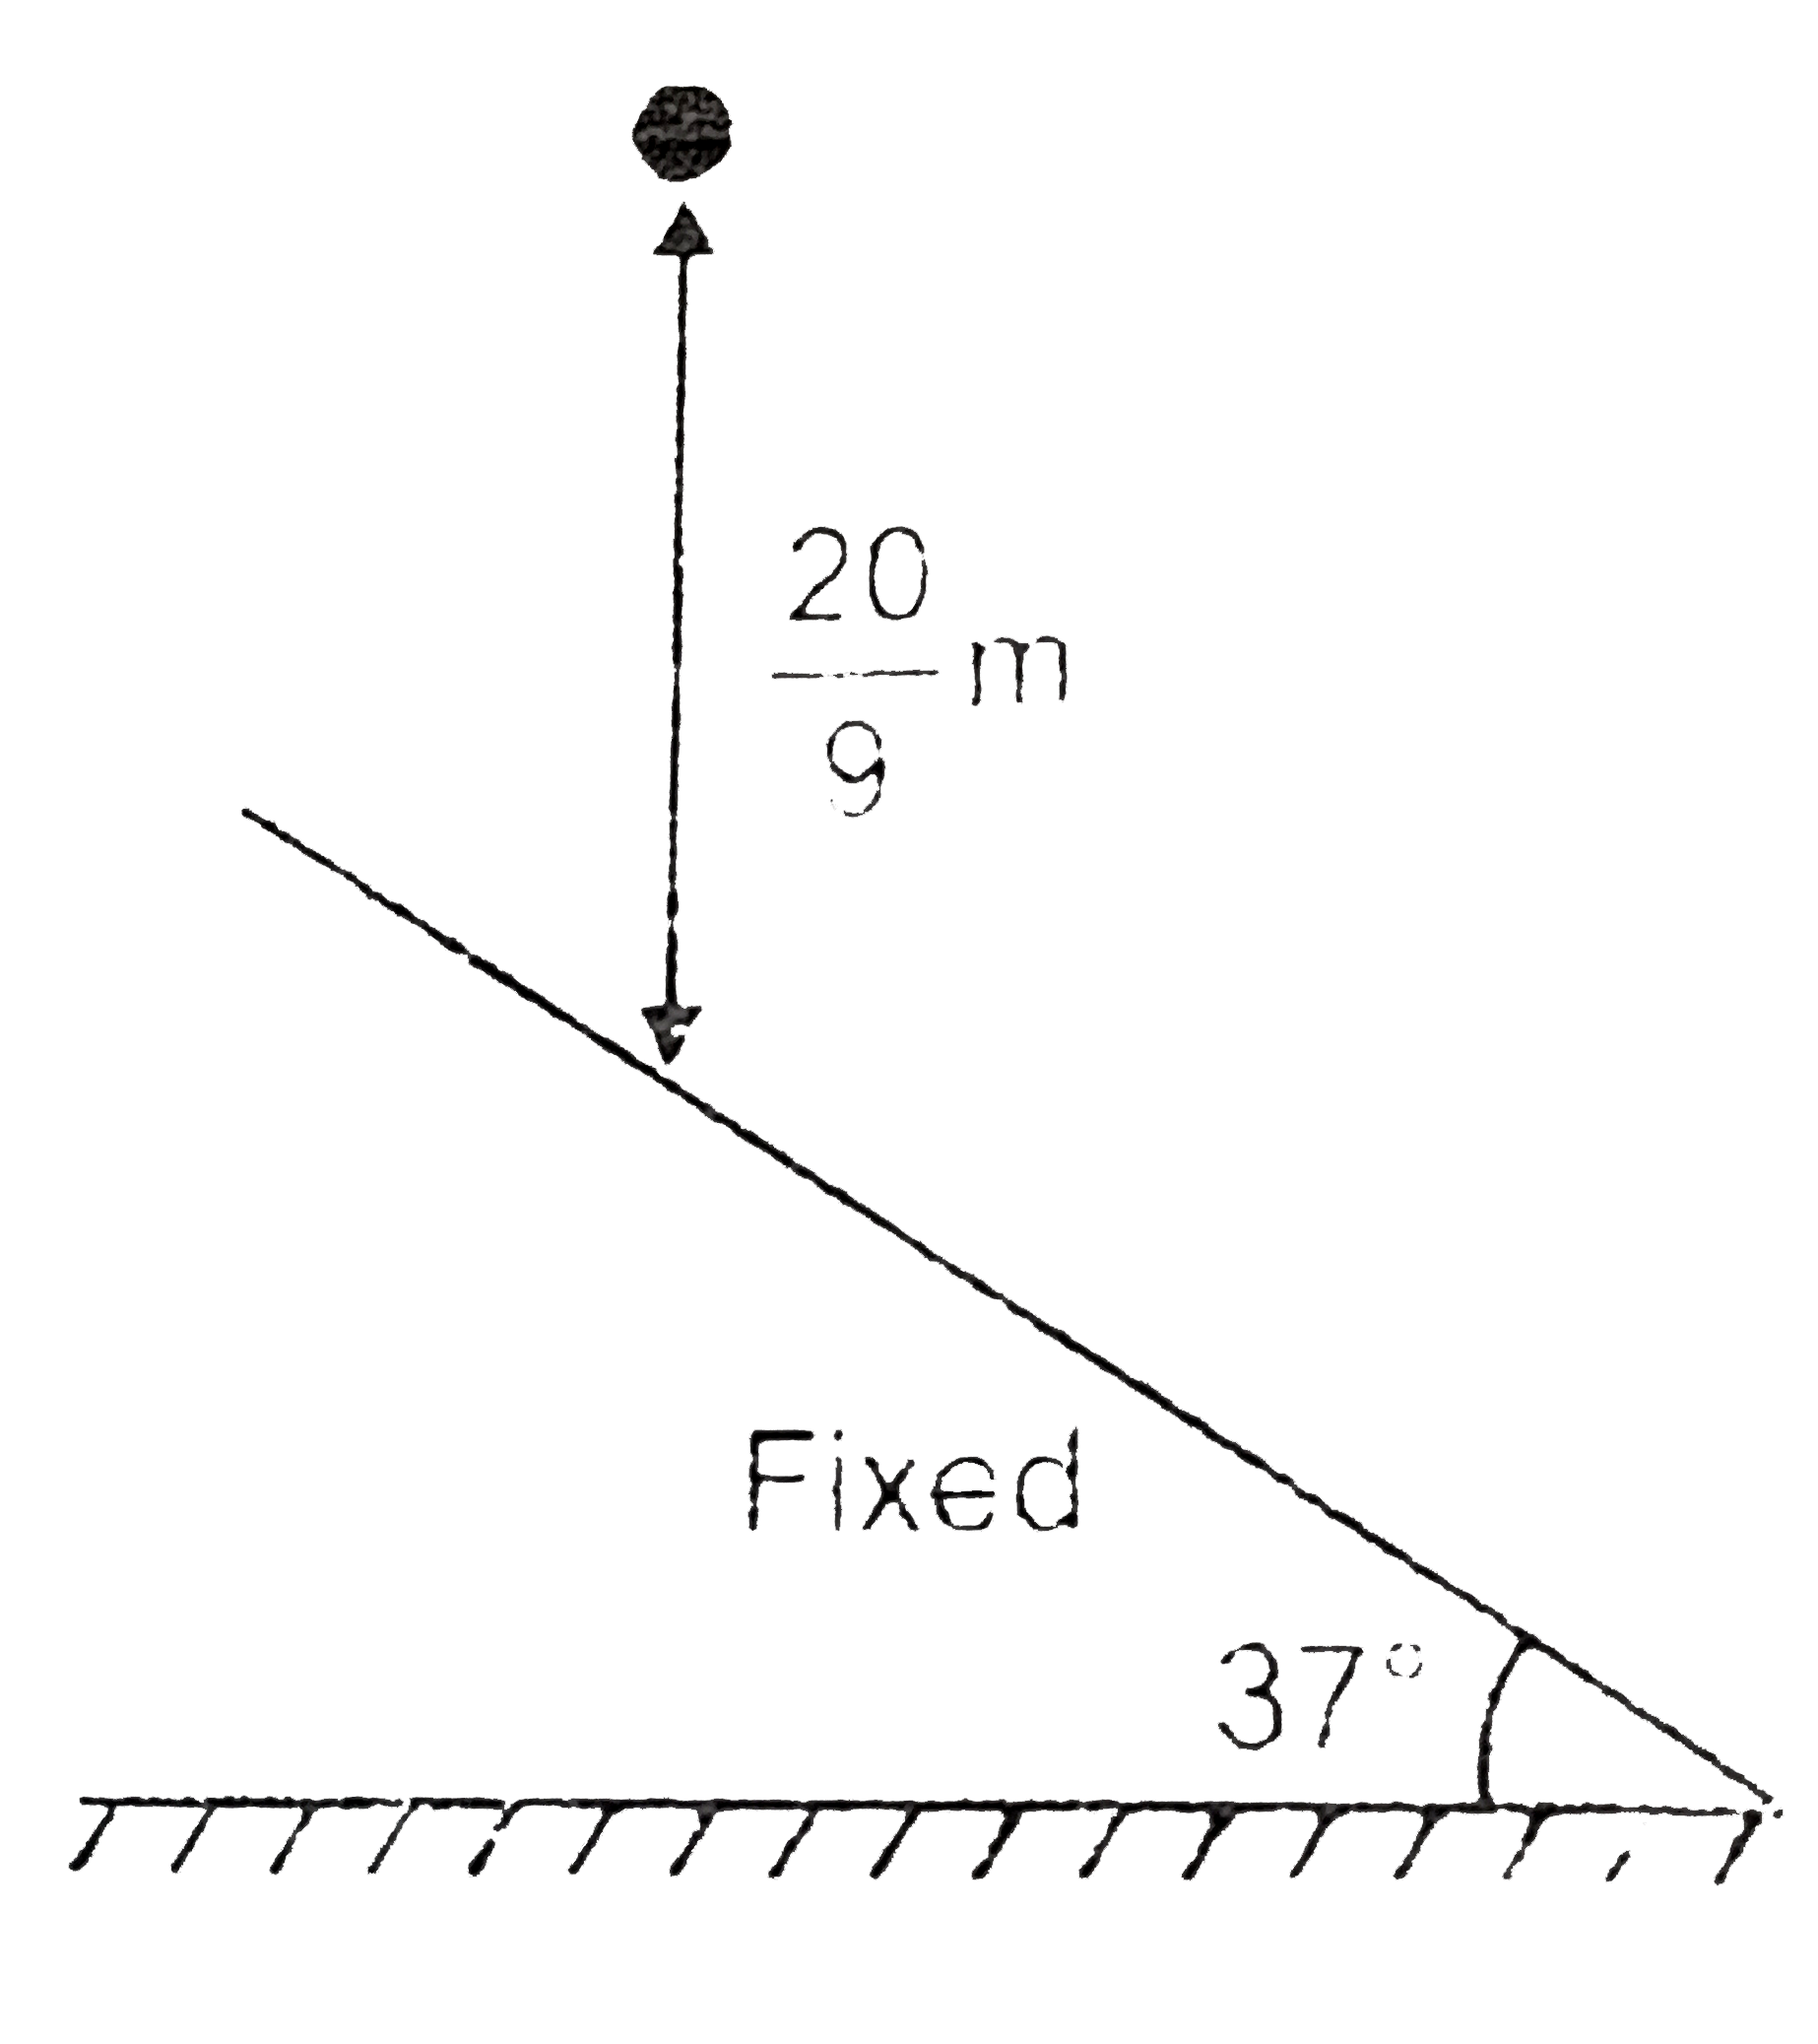 A ball is dropped on a large smooth inclined plane of angle of inclination 37^(@), from a height of (20)/(9)m above the point of impact. The coefficient of restitution of the impact is e = (9)/(16) then :   [Take g = 10 m//s^(2)]